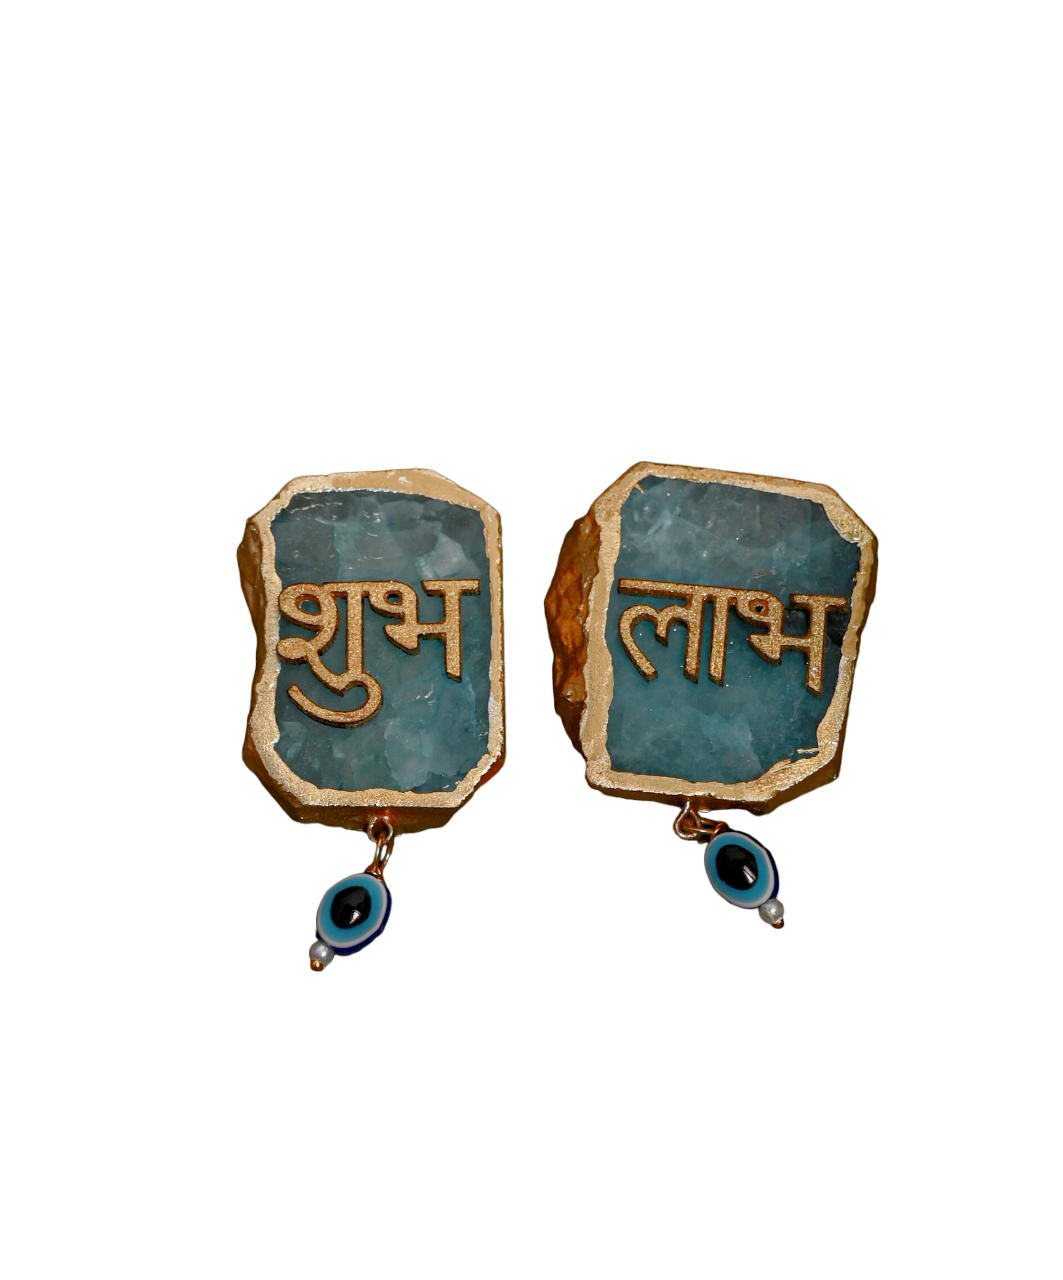 Handcrafted Agate Shubh Labh Door Hangings Showpiece Perfect for Diwali Weddings or House Warmings Garland- Turquoise